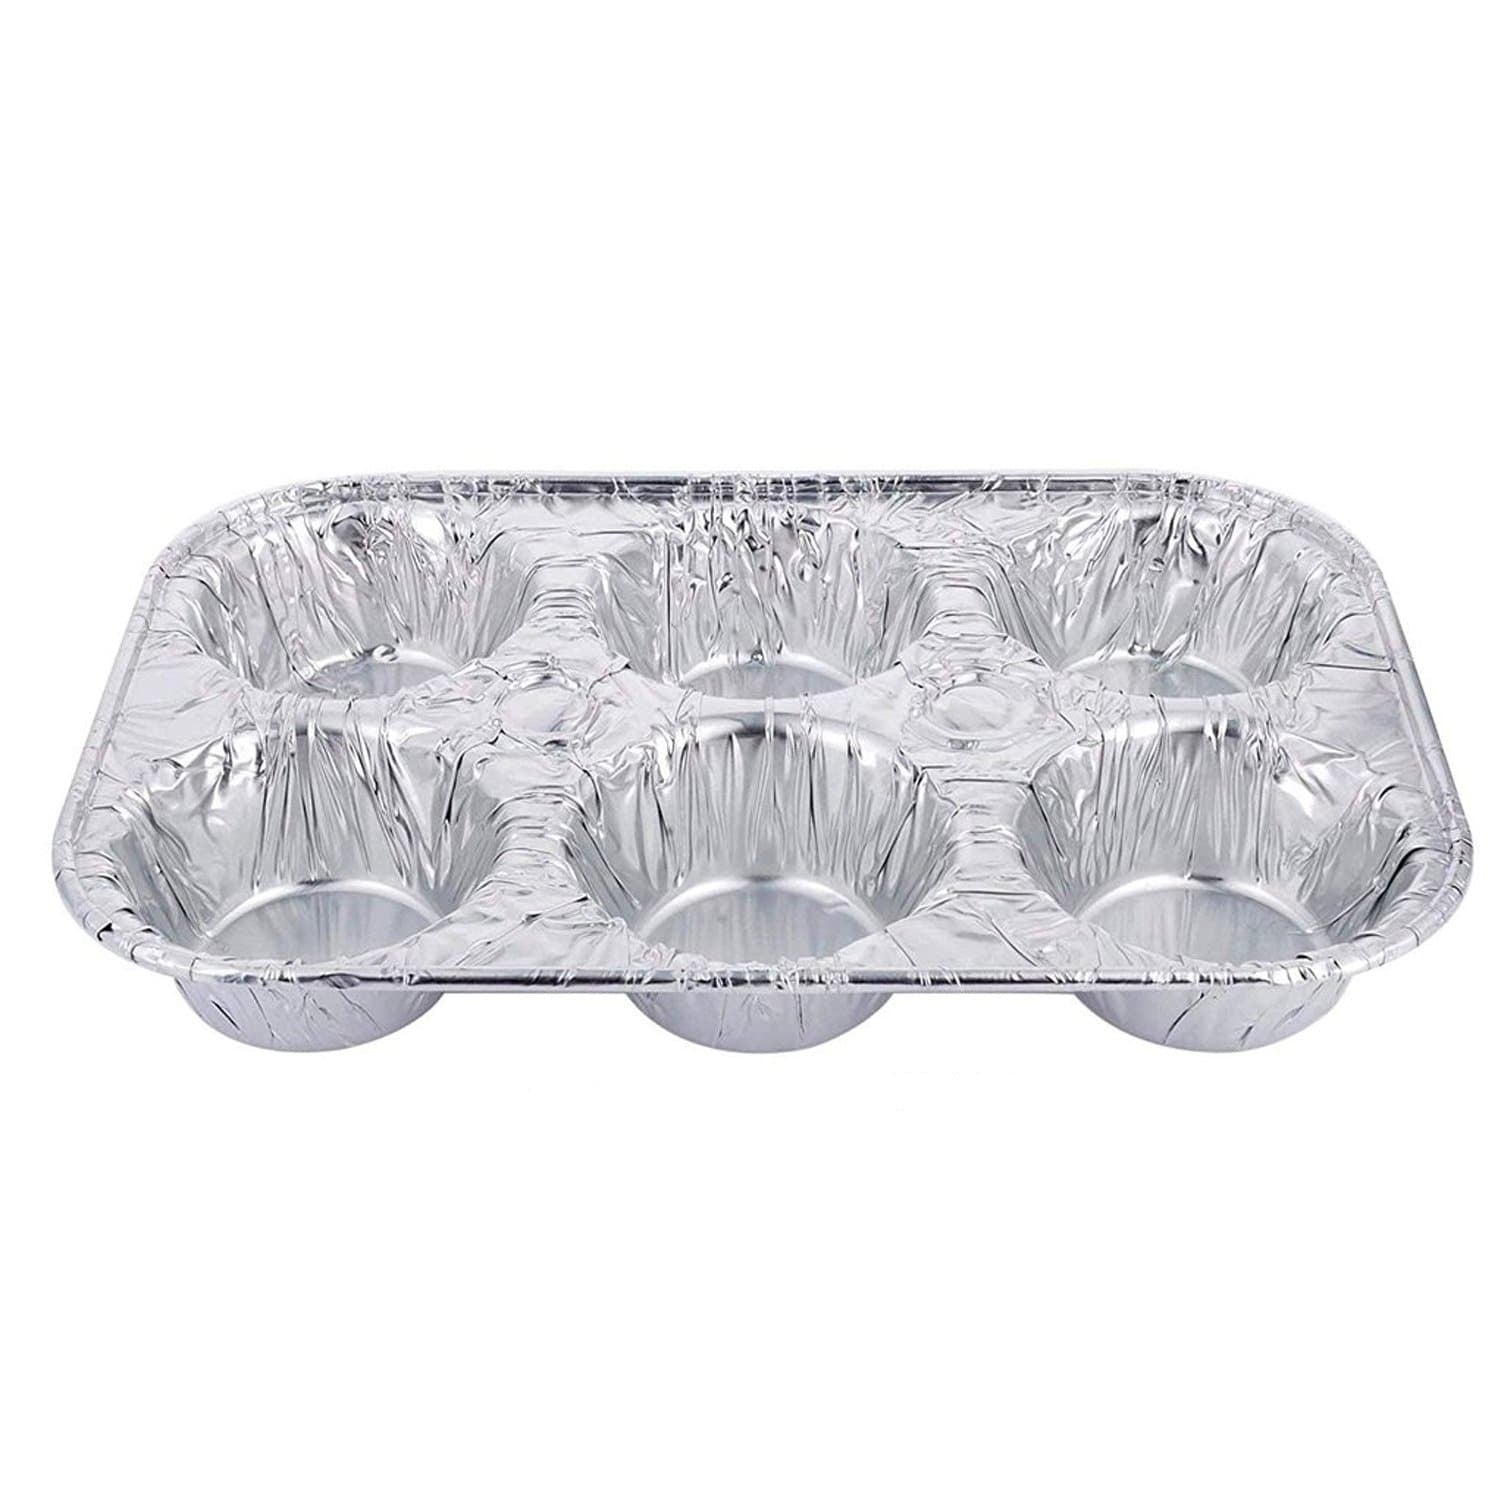 Nicole Home Collection 00563 Aluminum 6 Cup Muffin Pan - 200 per Case